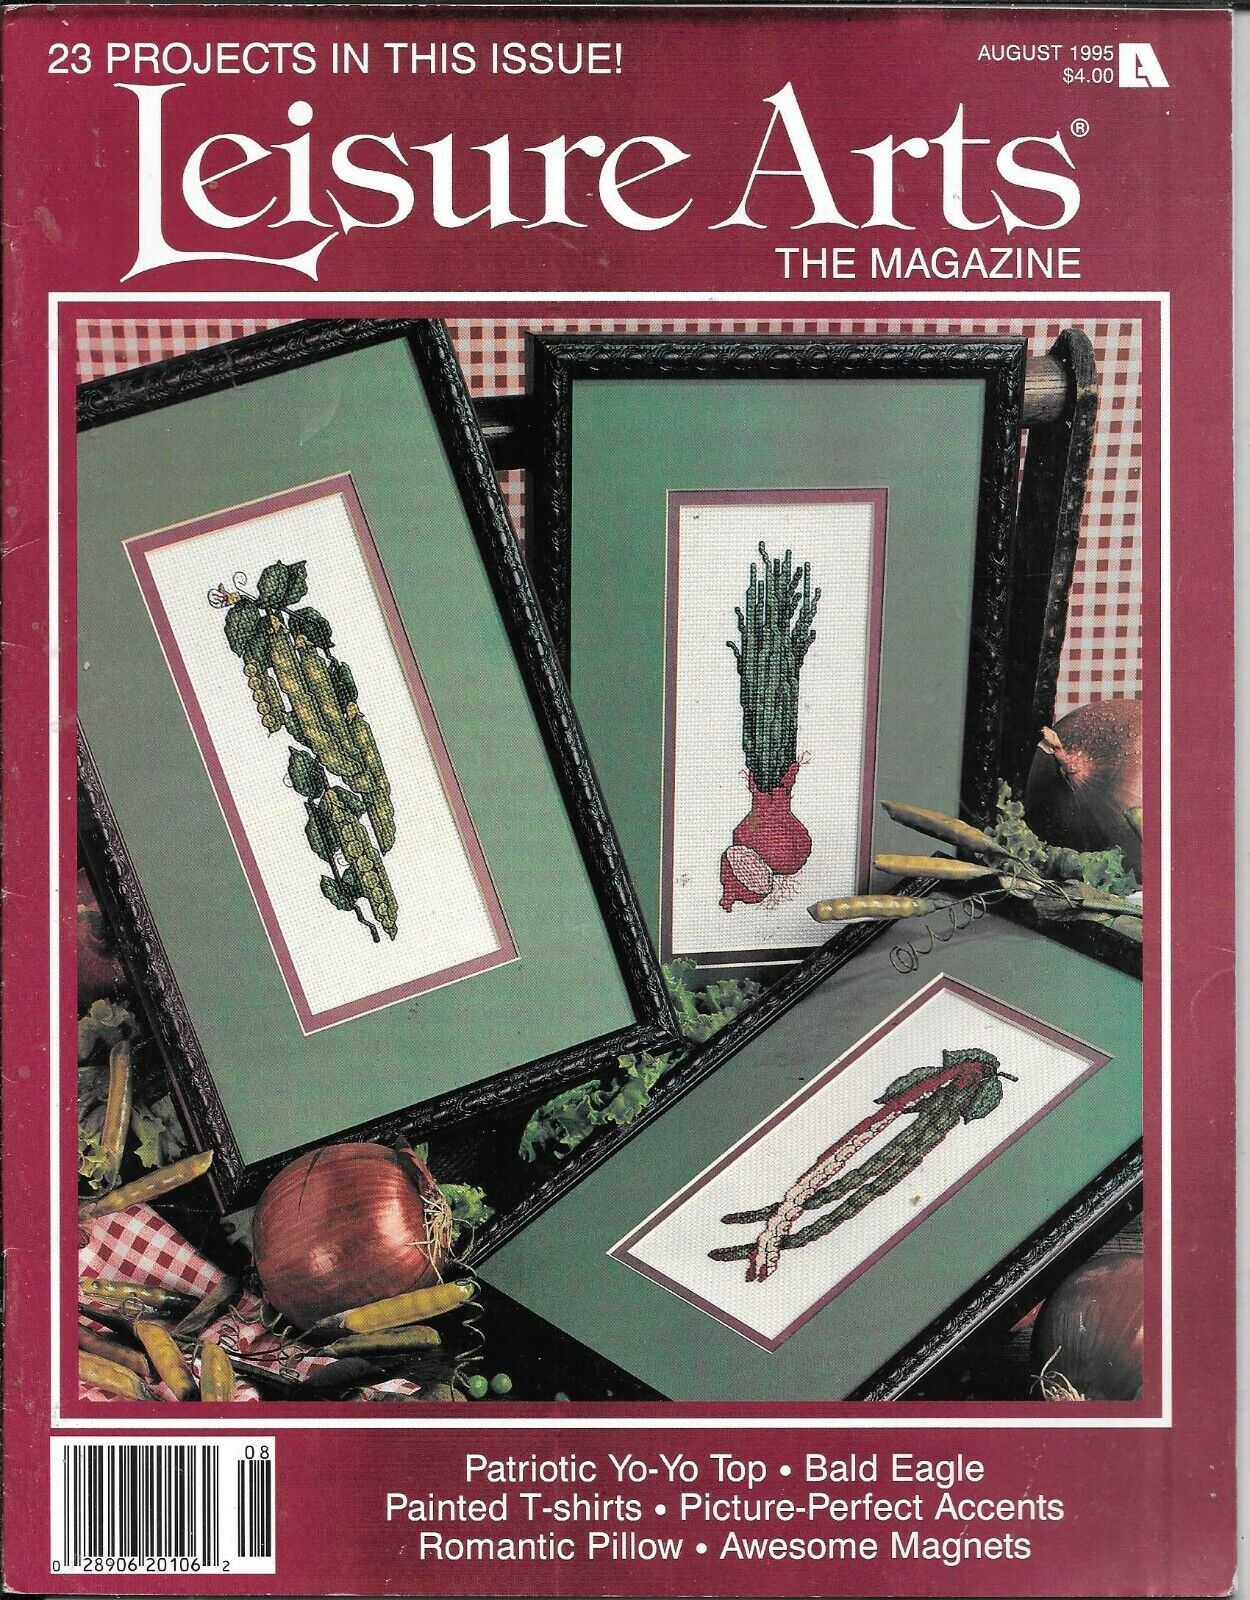 Leisure Arts Magazine August 1995 - 23 Projects